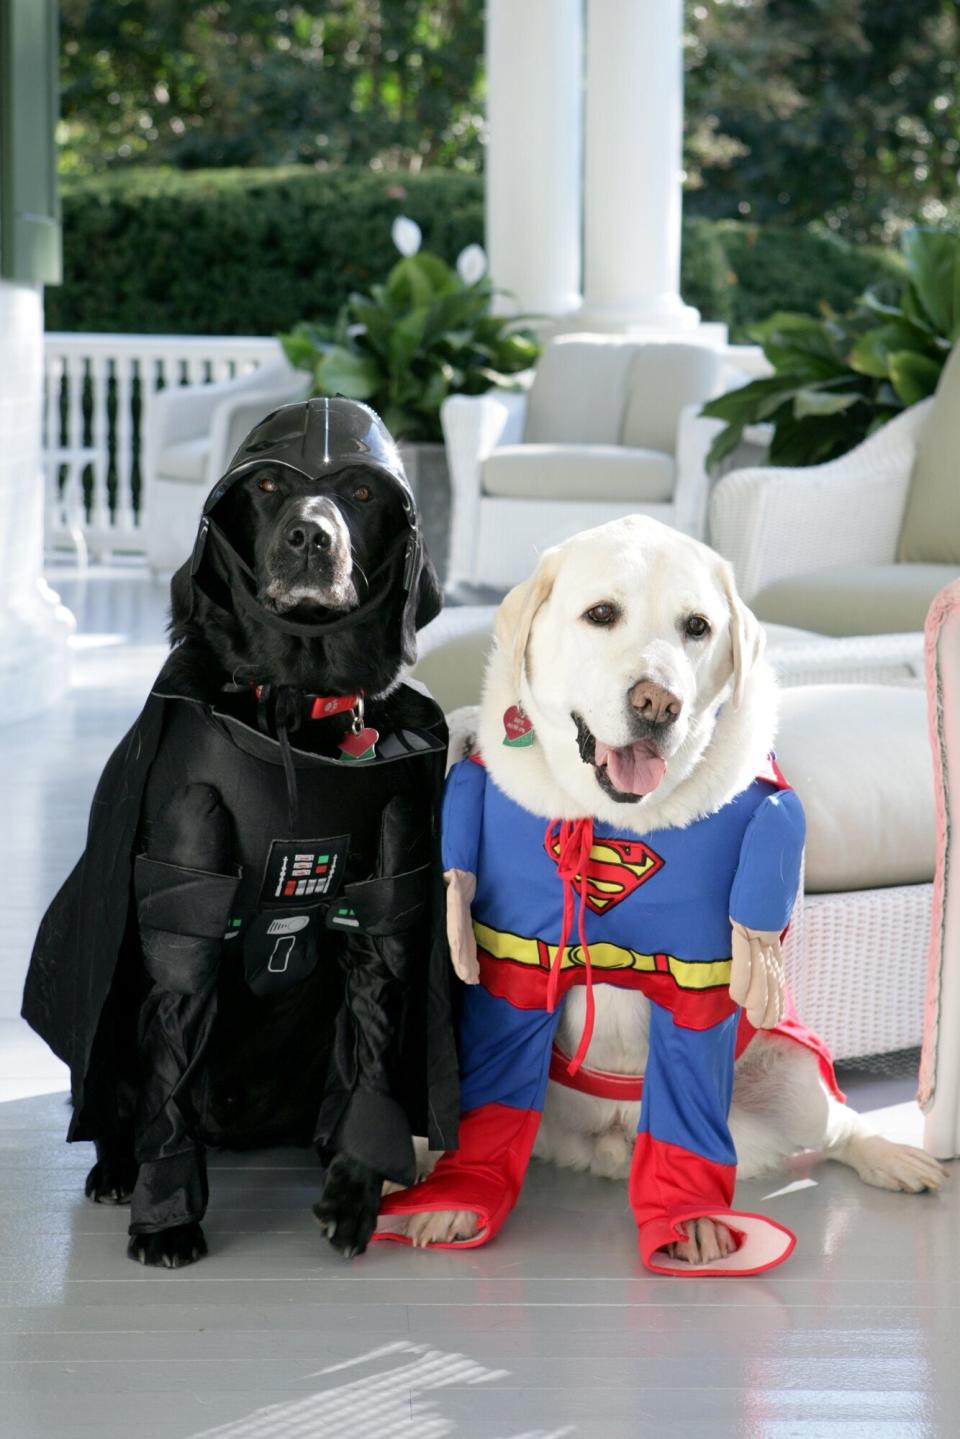 Dick Cheney's Labrador retrievers, Jackson and Dave, prepare for Halloween at the residence on Oct. 30, 2007.